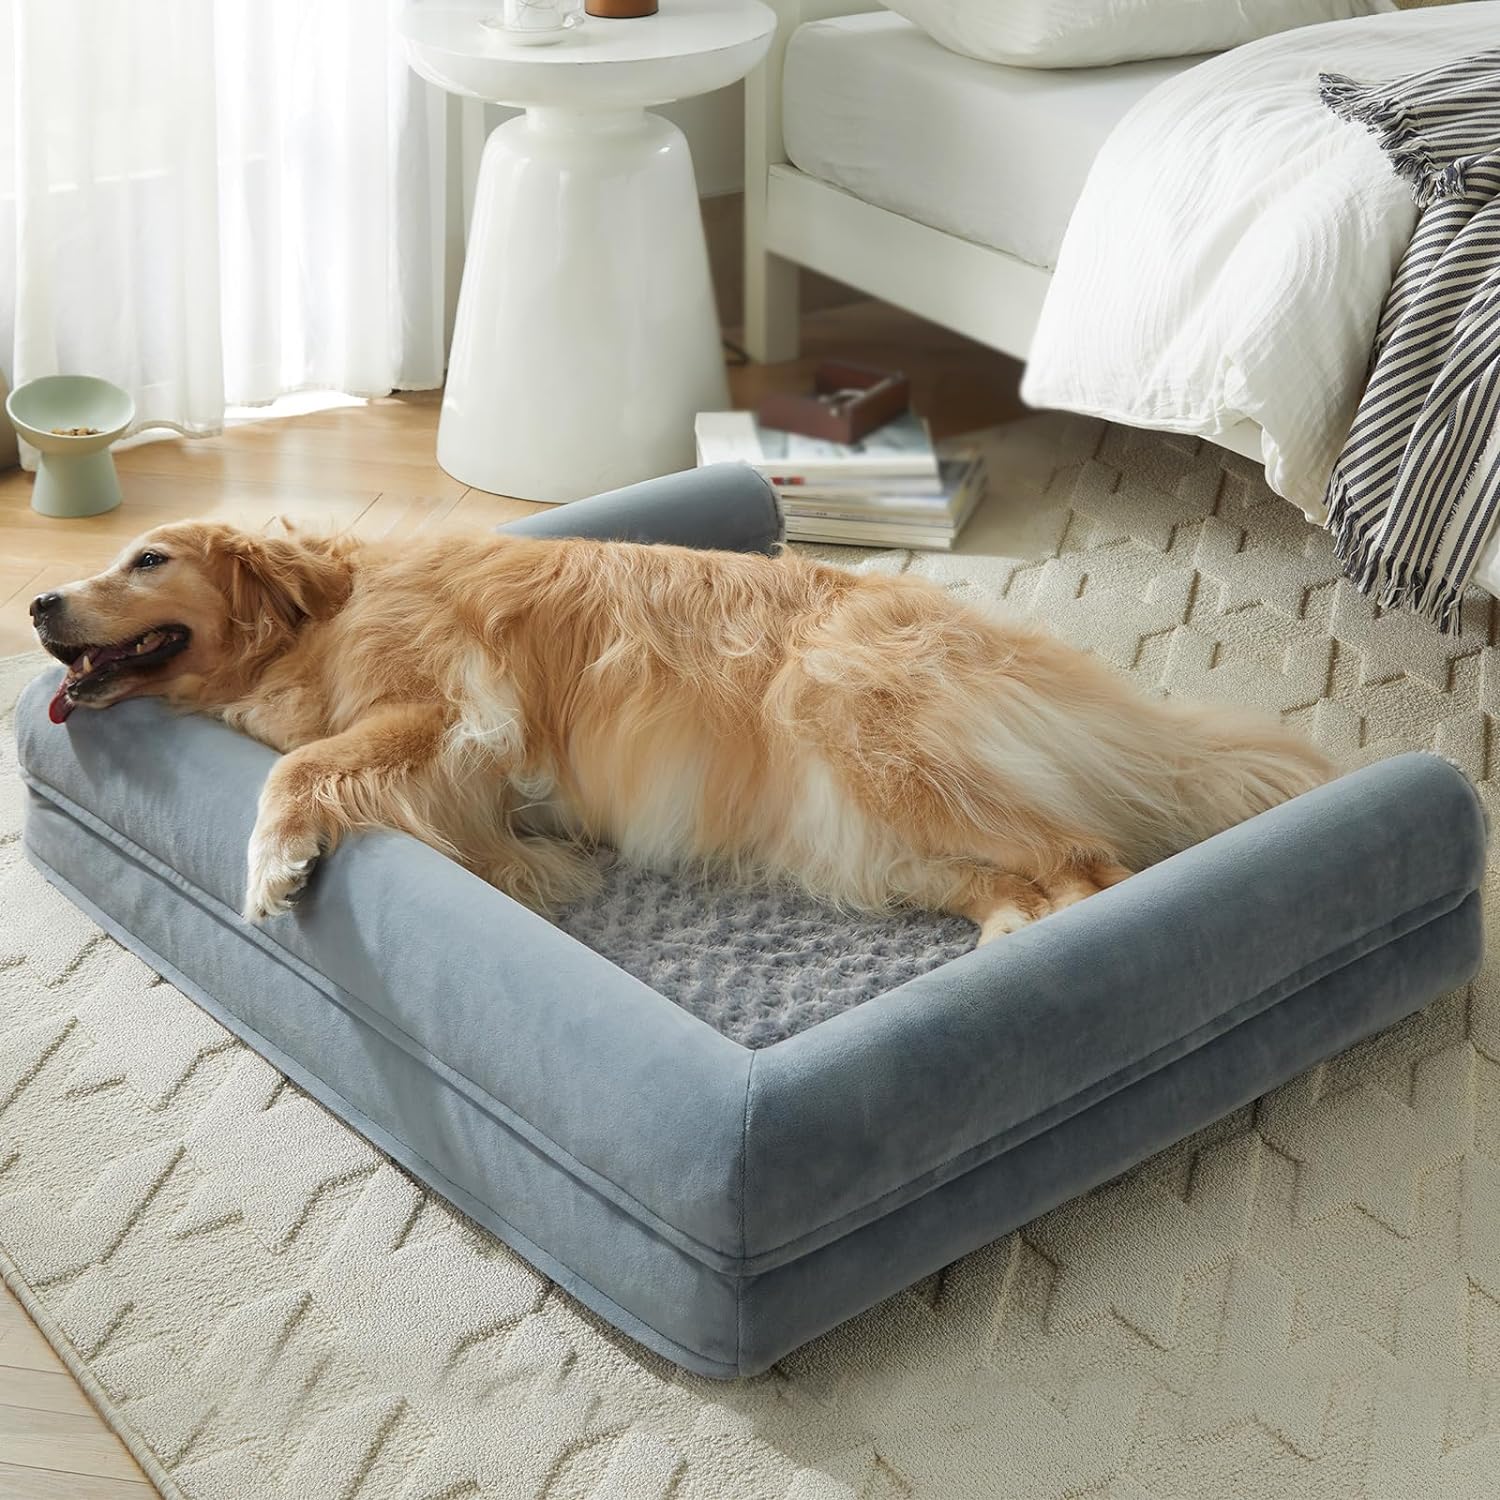 LNSSFFER Washable Dog Beds for Large Dogs, Orthopedic Dog Sofa Bed with Removable Cover Waterproof Lining, Washable Pet Couch Bed with Sides, Memory Foam Dog Bed for Large Dog Cat Sleeping, Grey